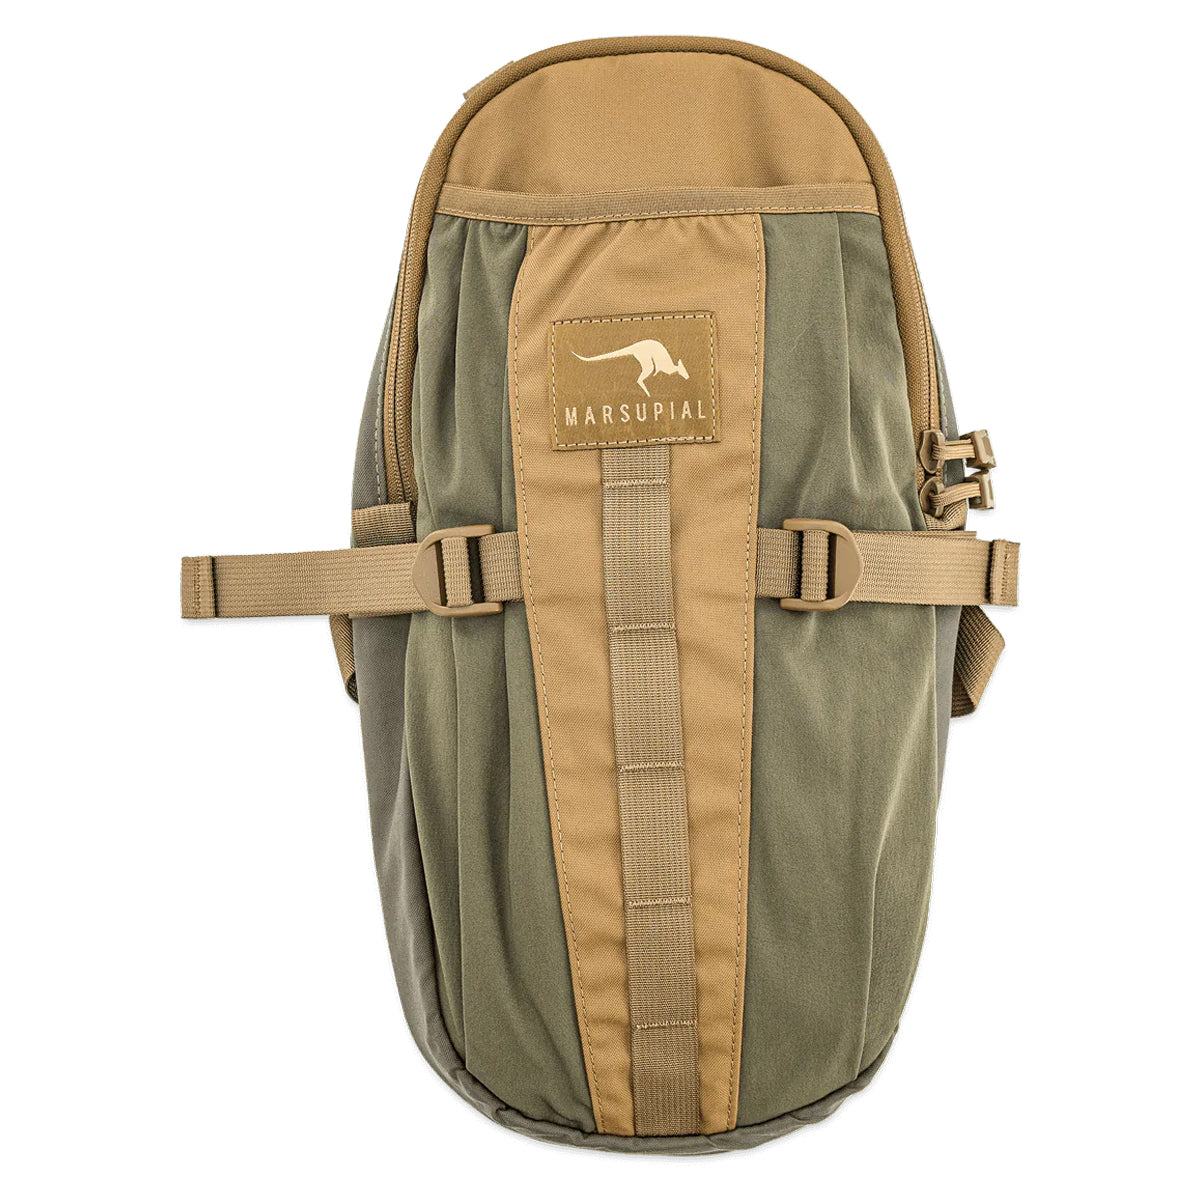 Marsupial Gear Hydration Pack in Ranger Green by GOHUNT | Marsupial Gear - GOHUNT Shop